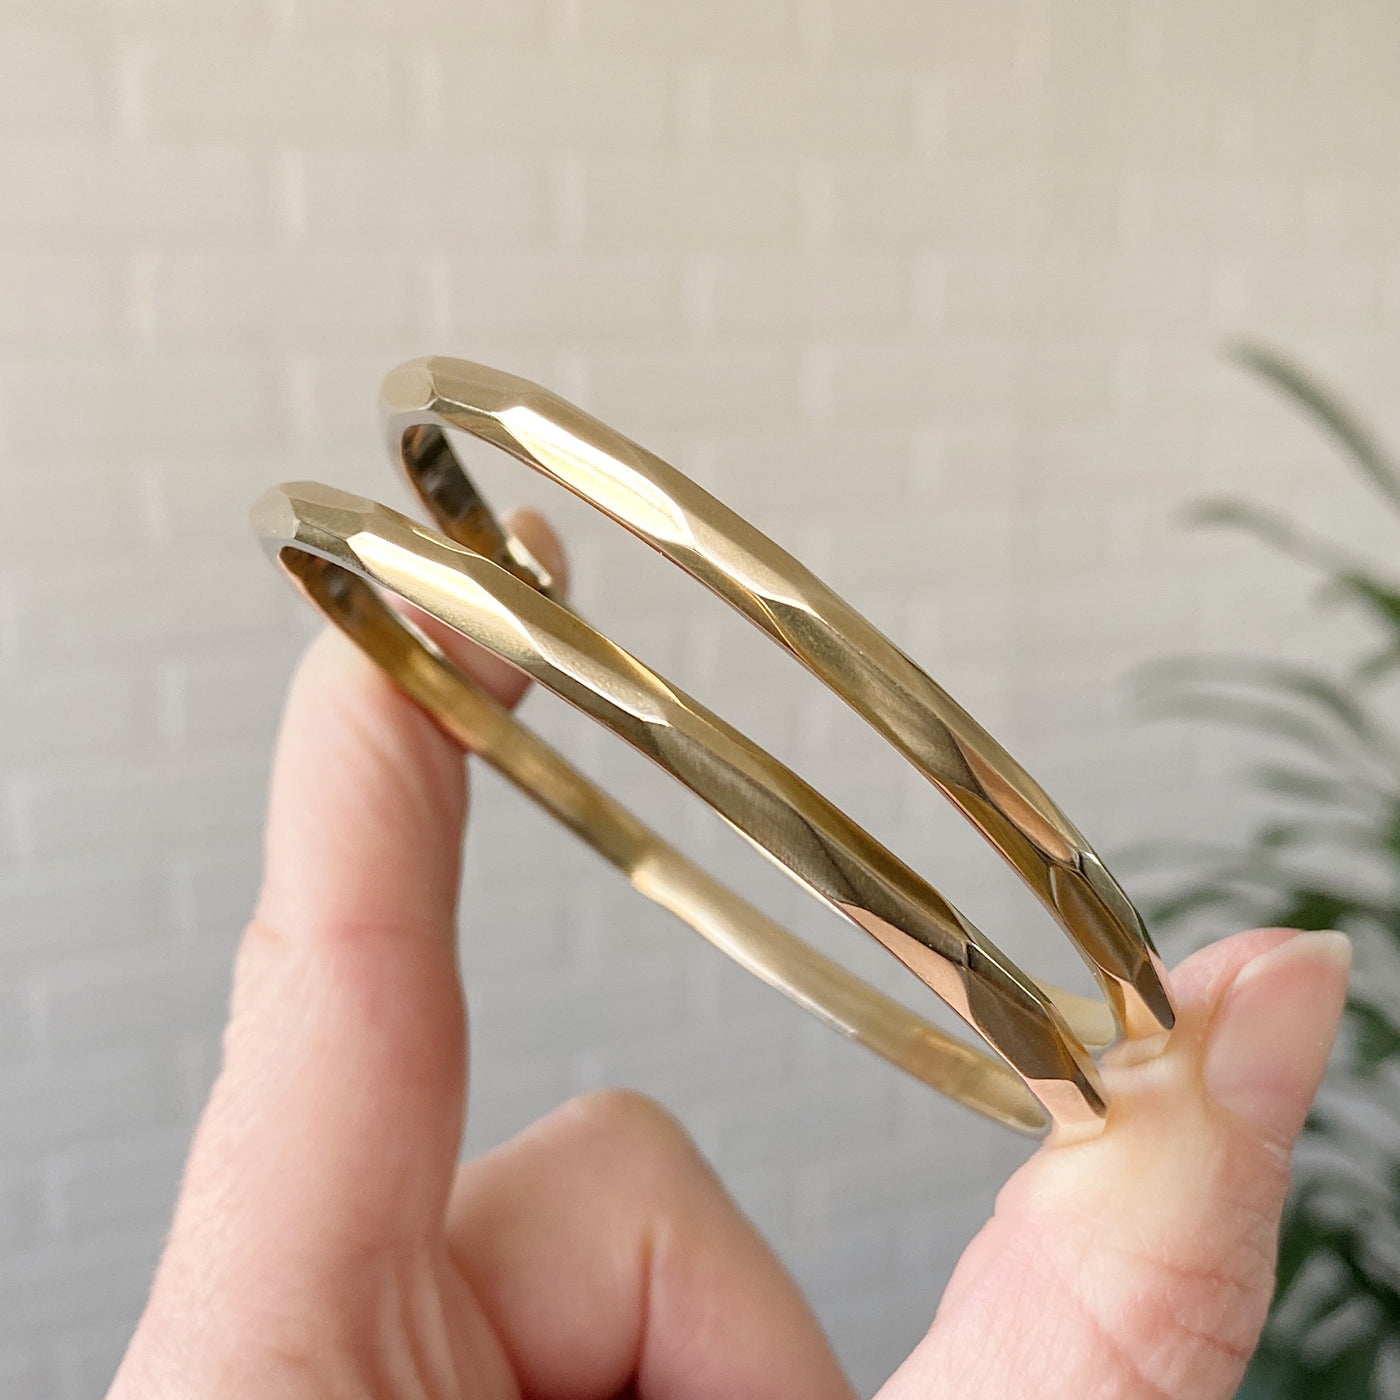 stackable faceted yellow bronze bangle bracelets held between two fingers